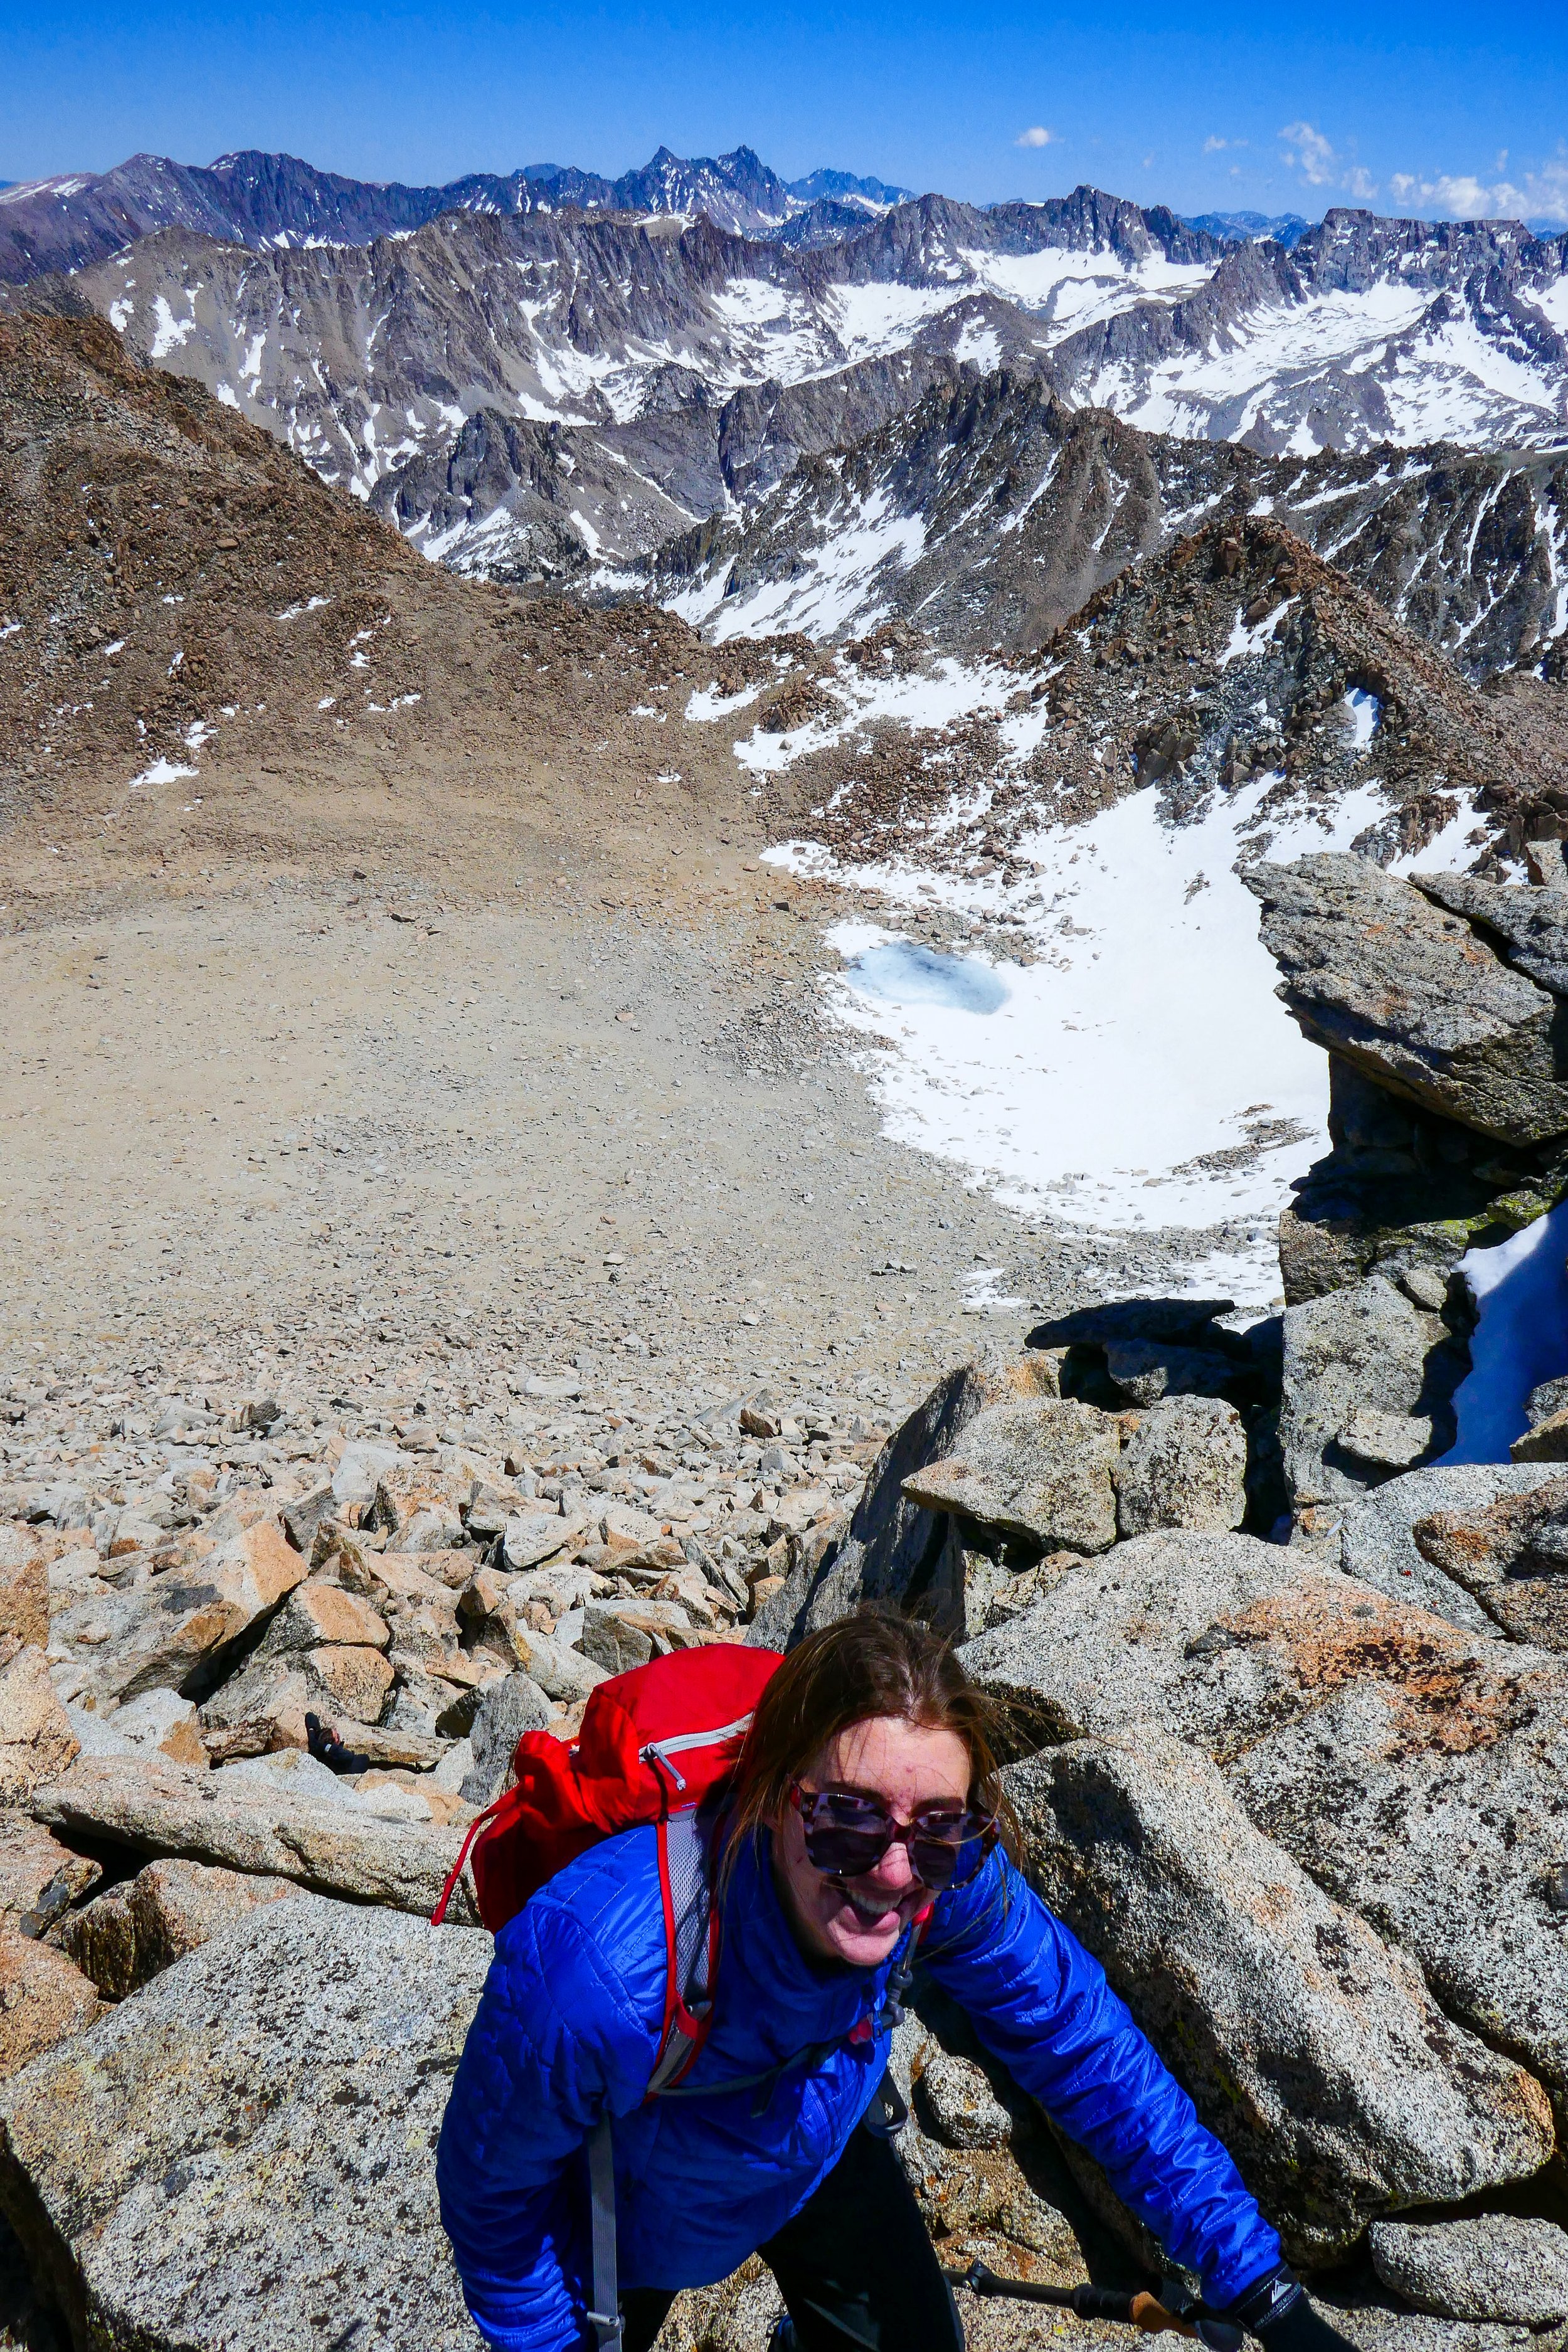 My friend, Sarah, approaching the summit of Mt. Lamarck